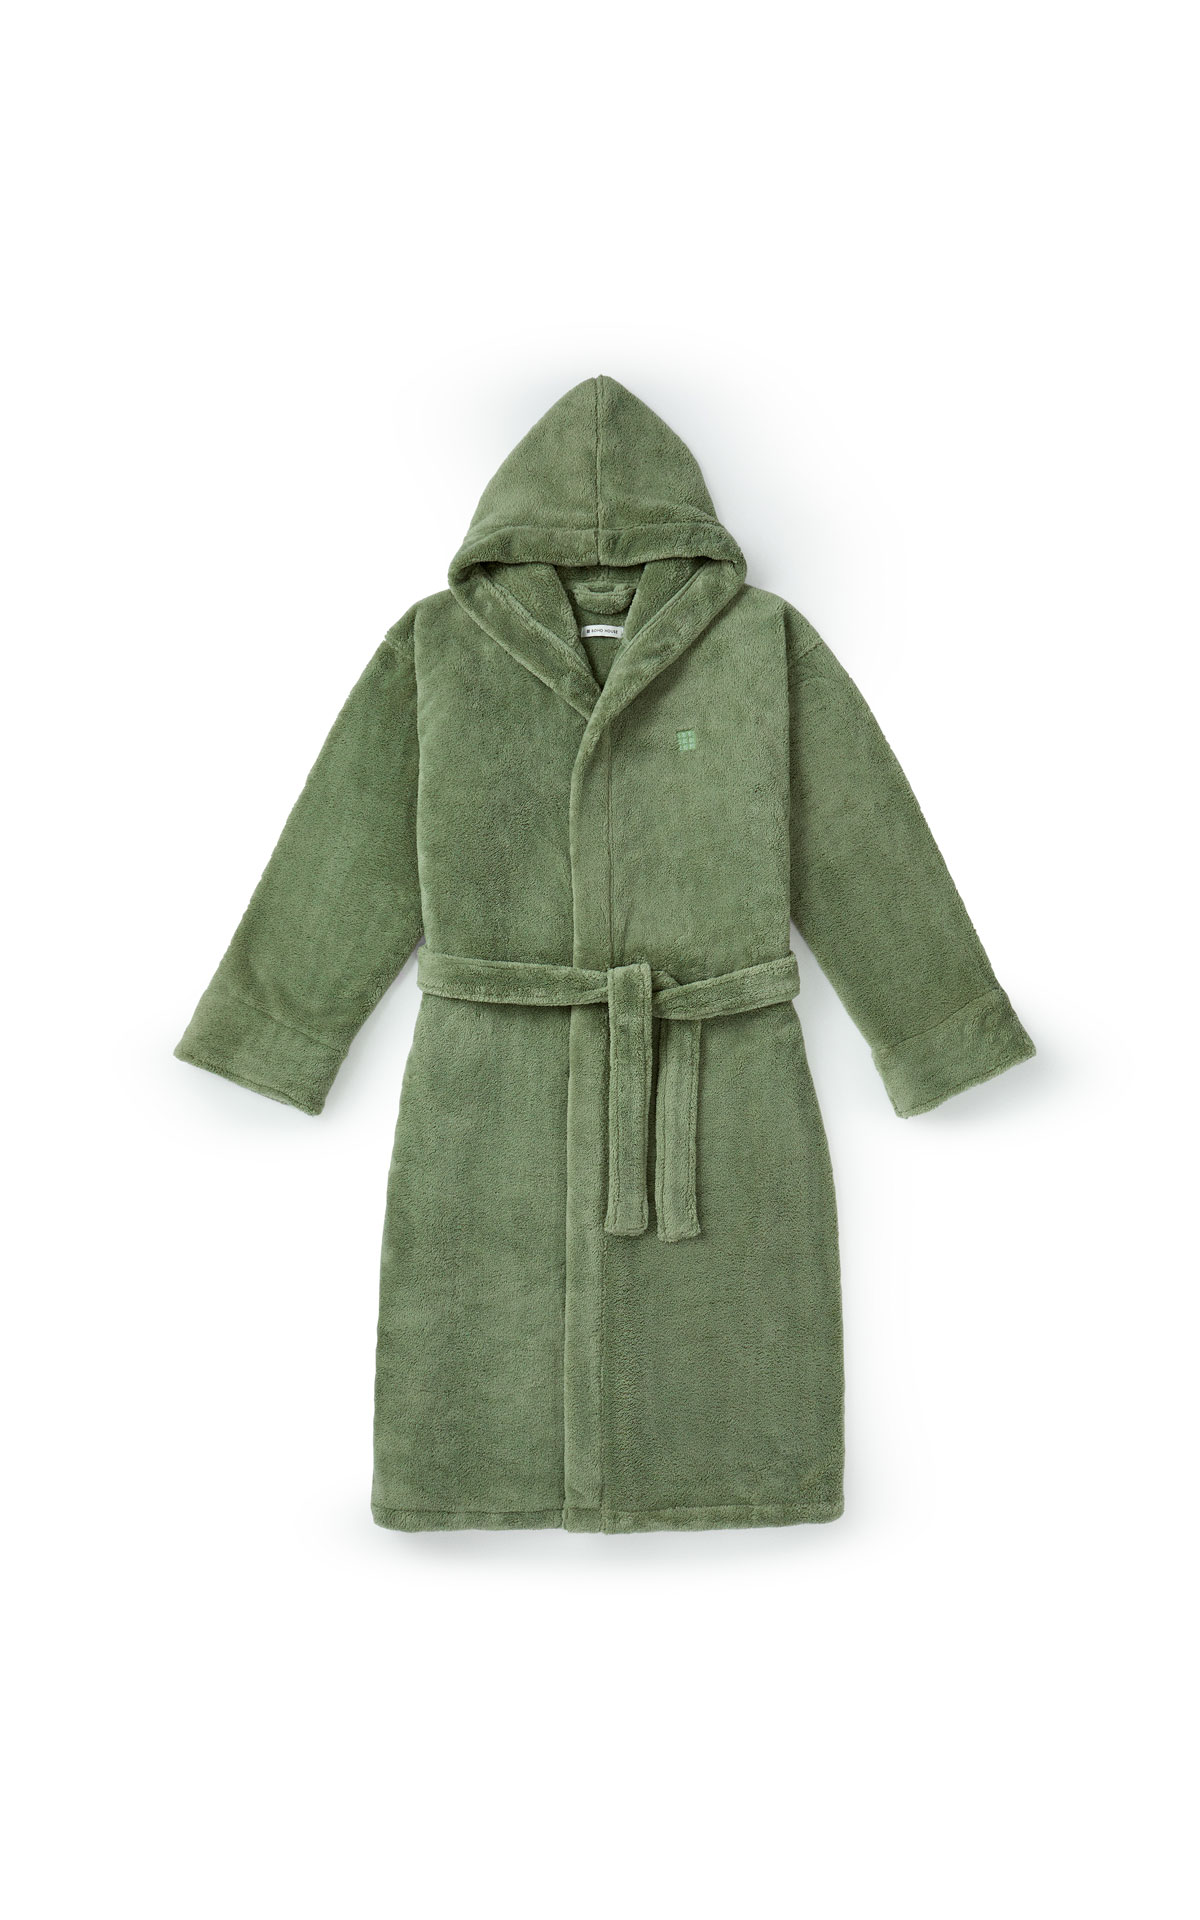 Soho Home House robe sage green from Bicester Village